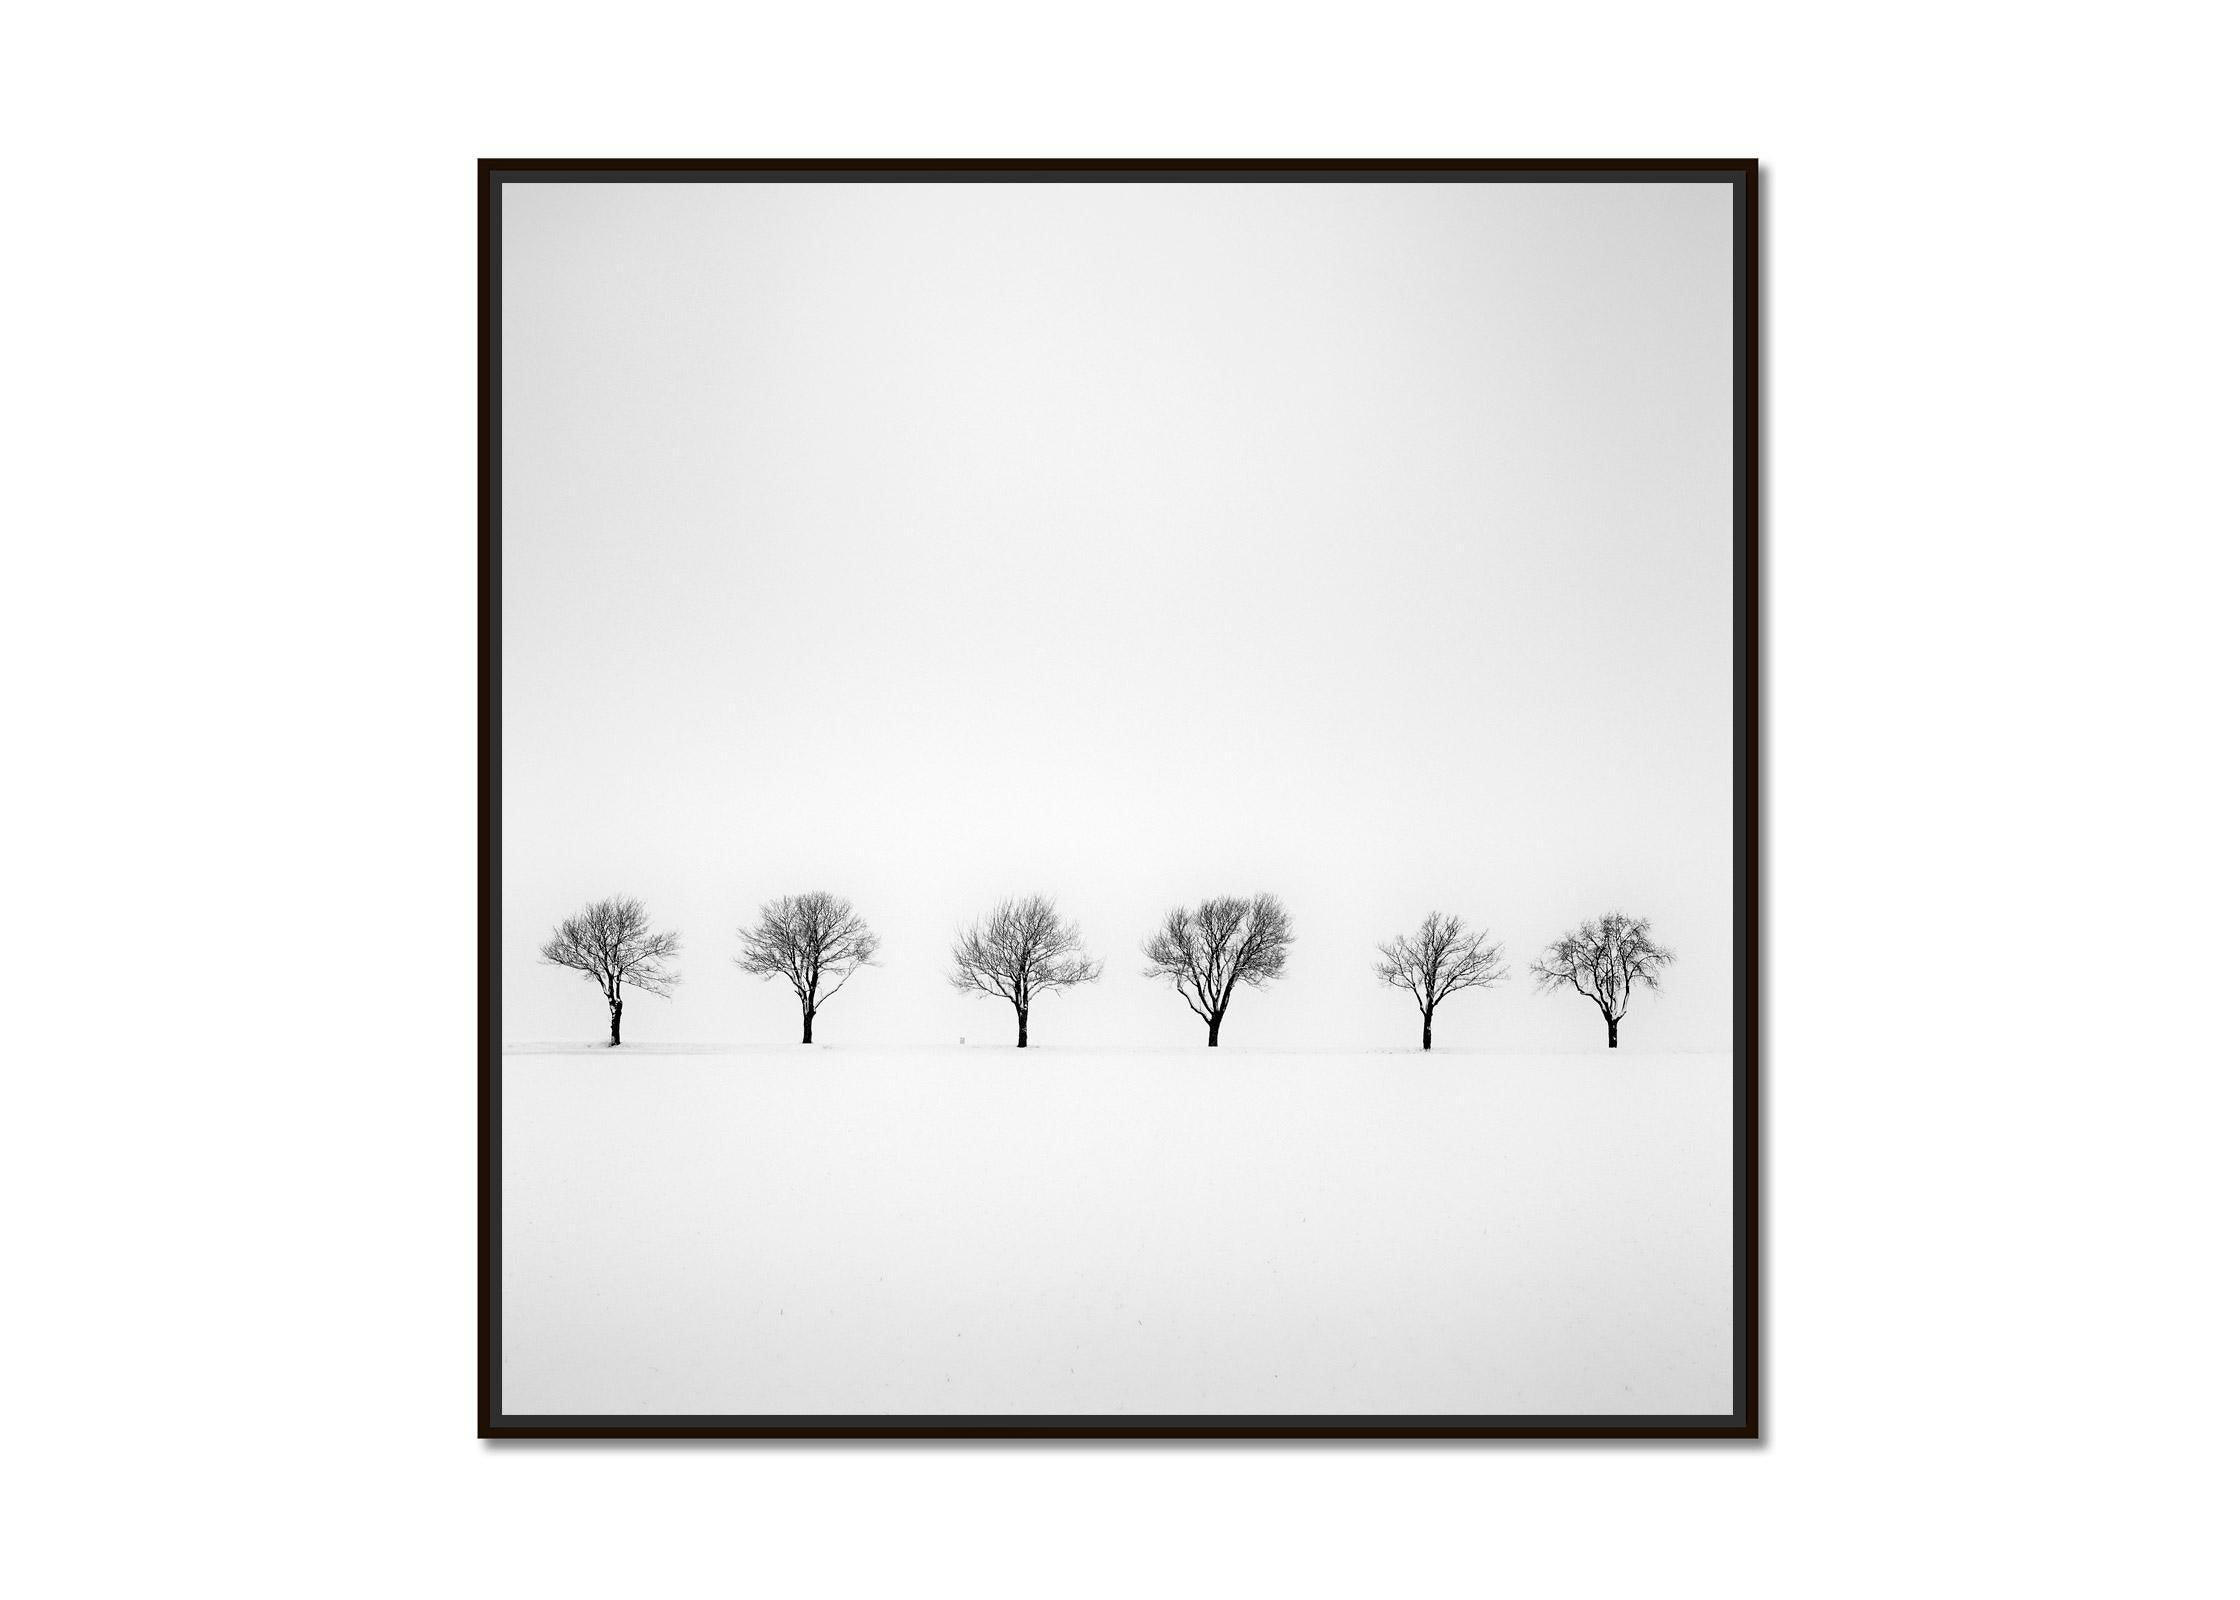 Trees in snowy Field, black and white minimalist photography, fine art landscape - Photograph by Gerald Berghammer